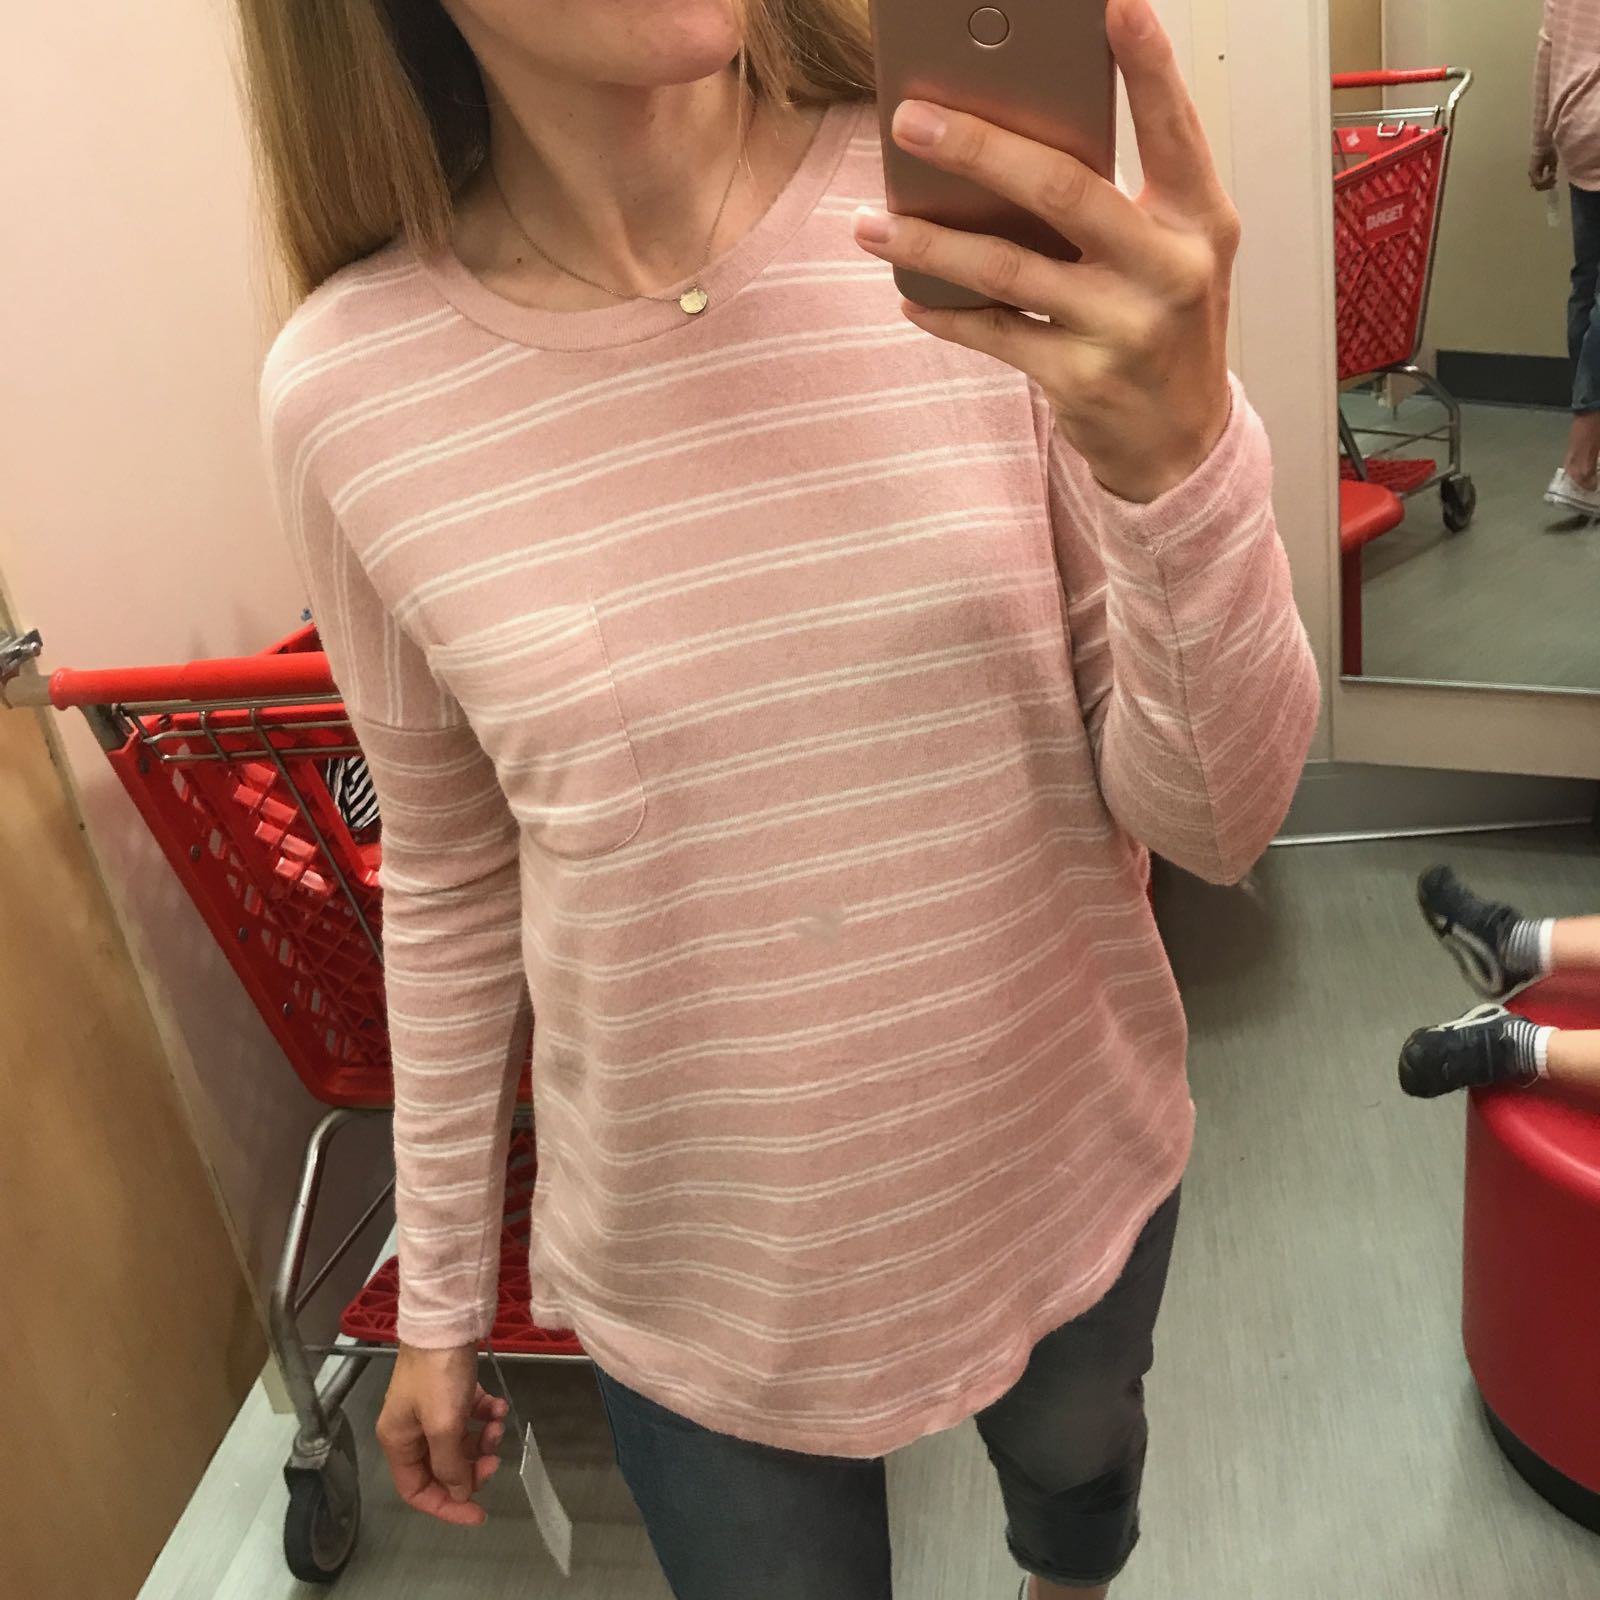 The Budget Babe reviews A New Day at Target.